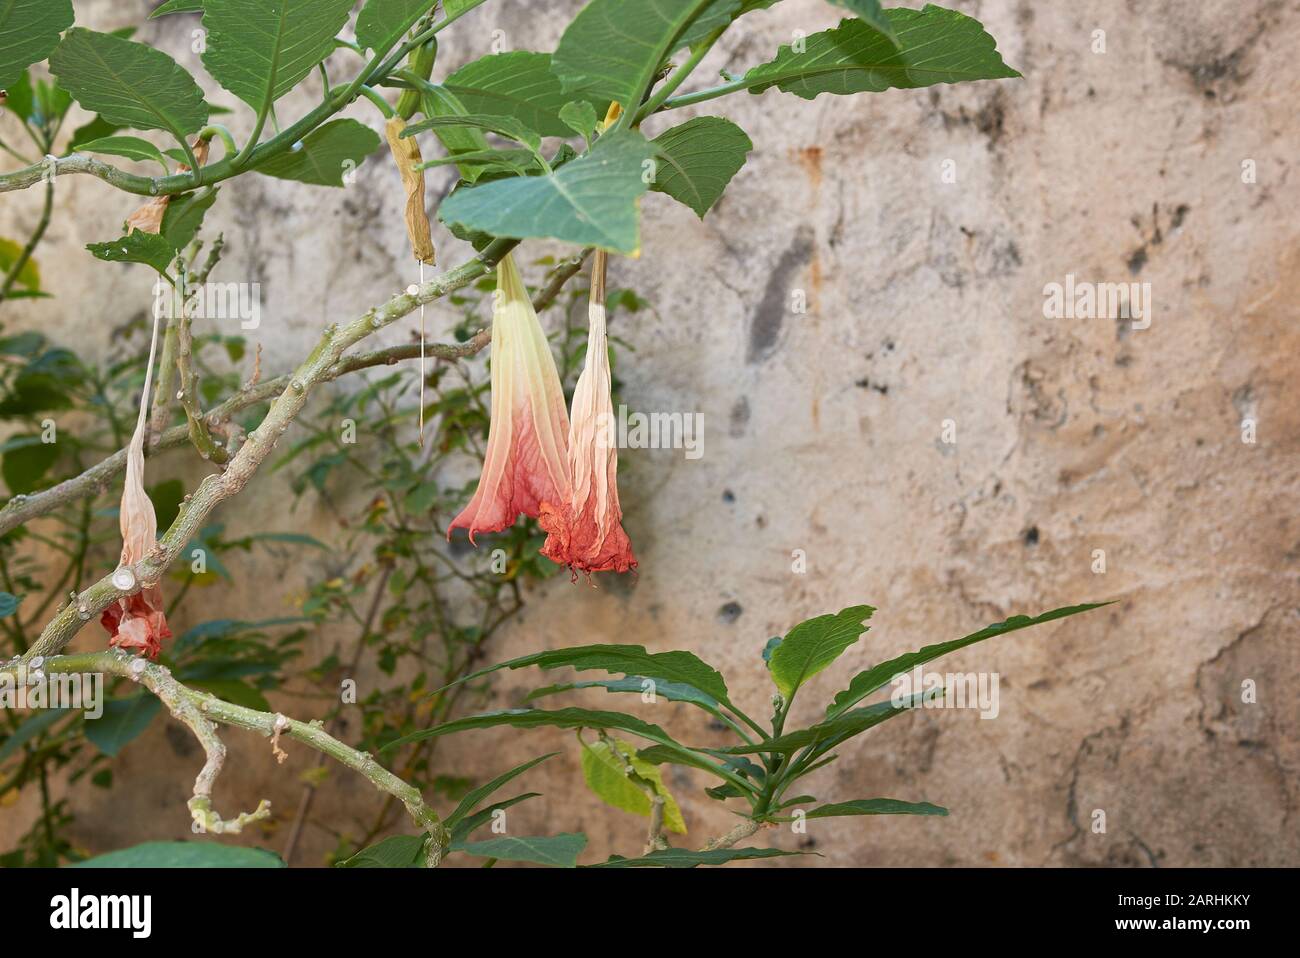 Brugmansia candida with faded flowers Stock Photo